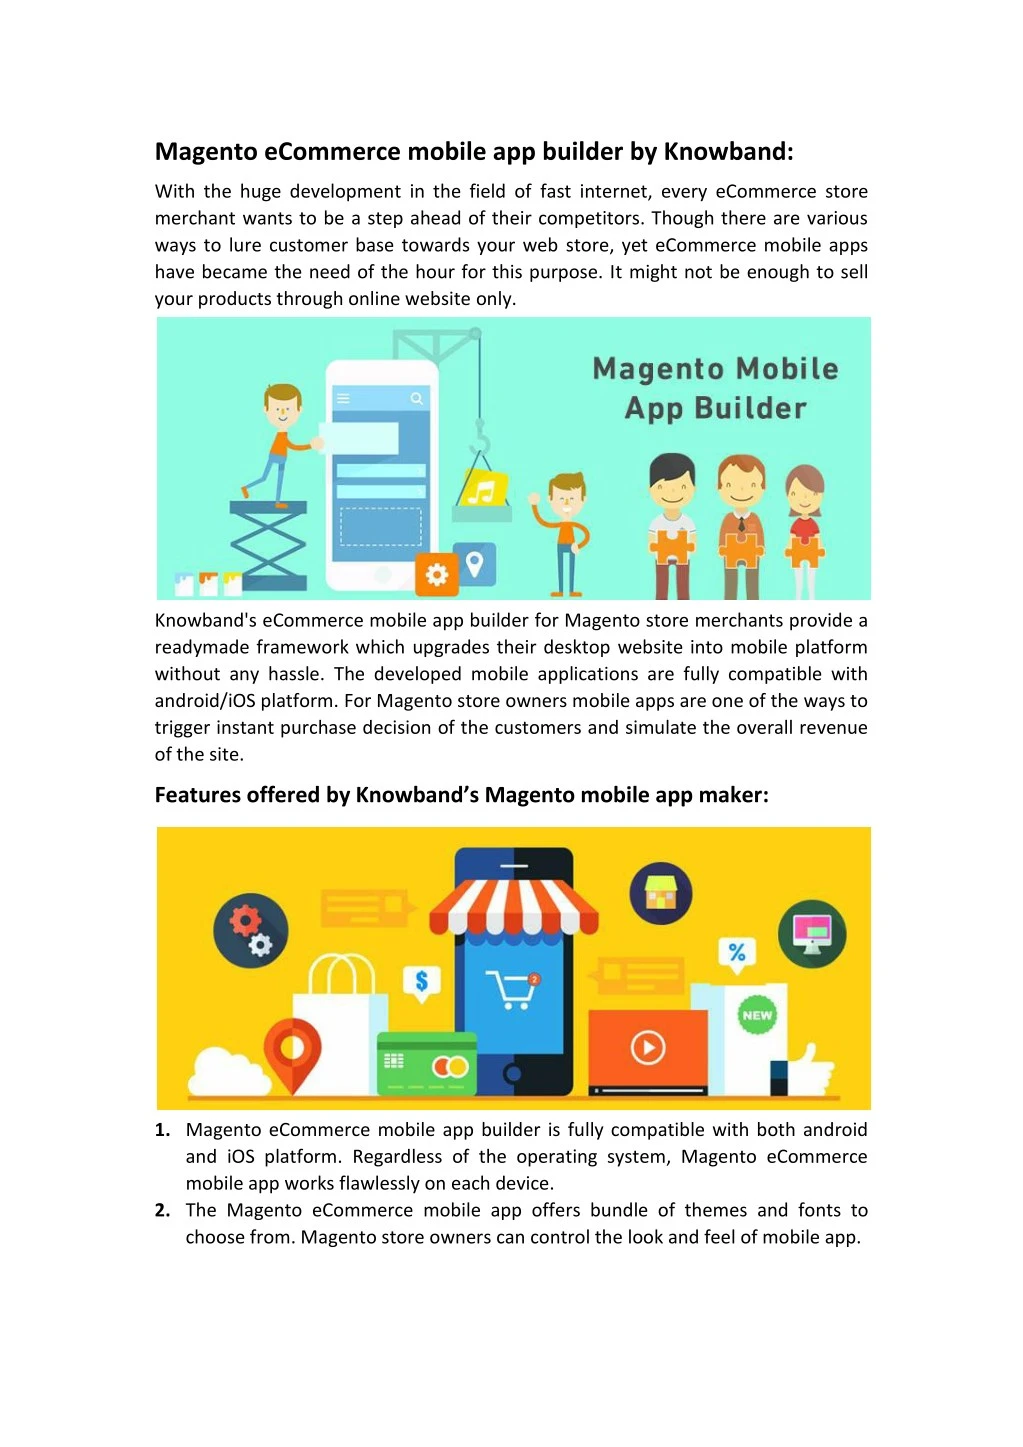 magento ecommerce mobile app builder by knowband